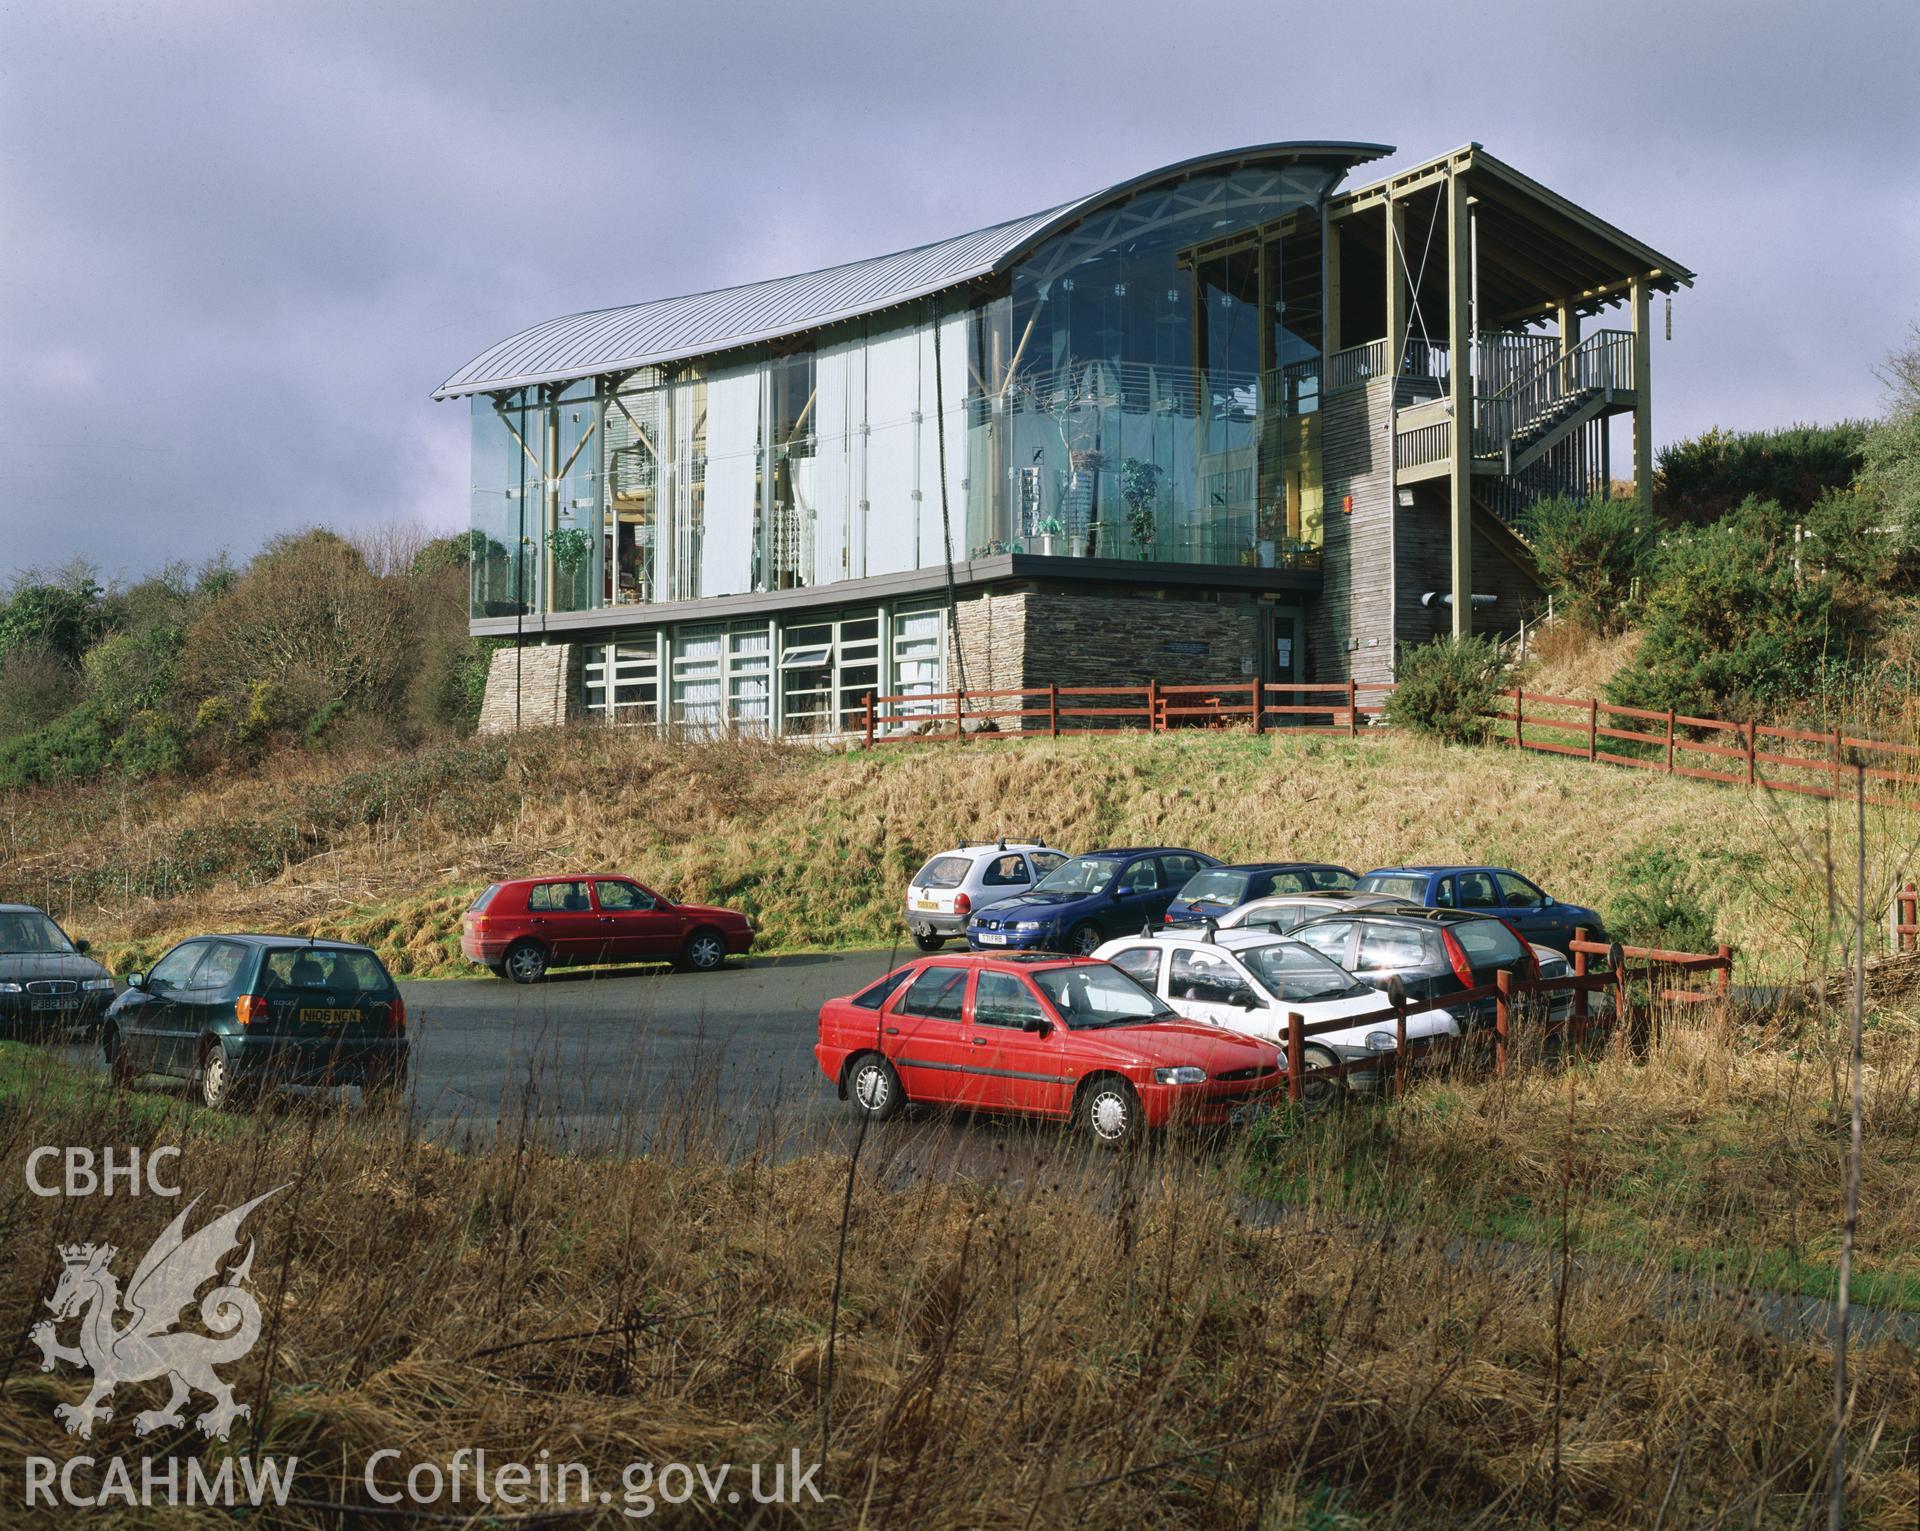 RCAHMW colour transparency showing the Welsh Wildlife Centre, Cilgerran, taken by Iain Wright, 2003.